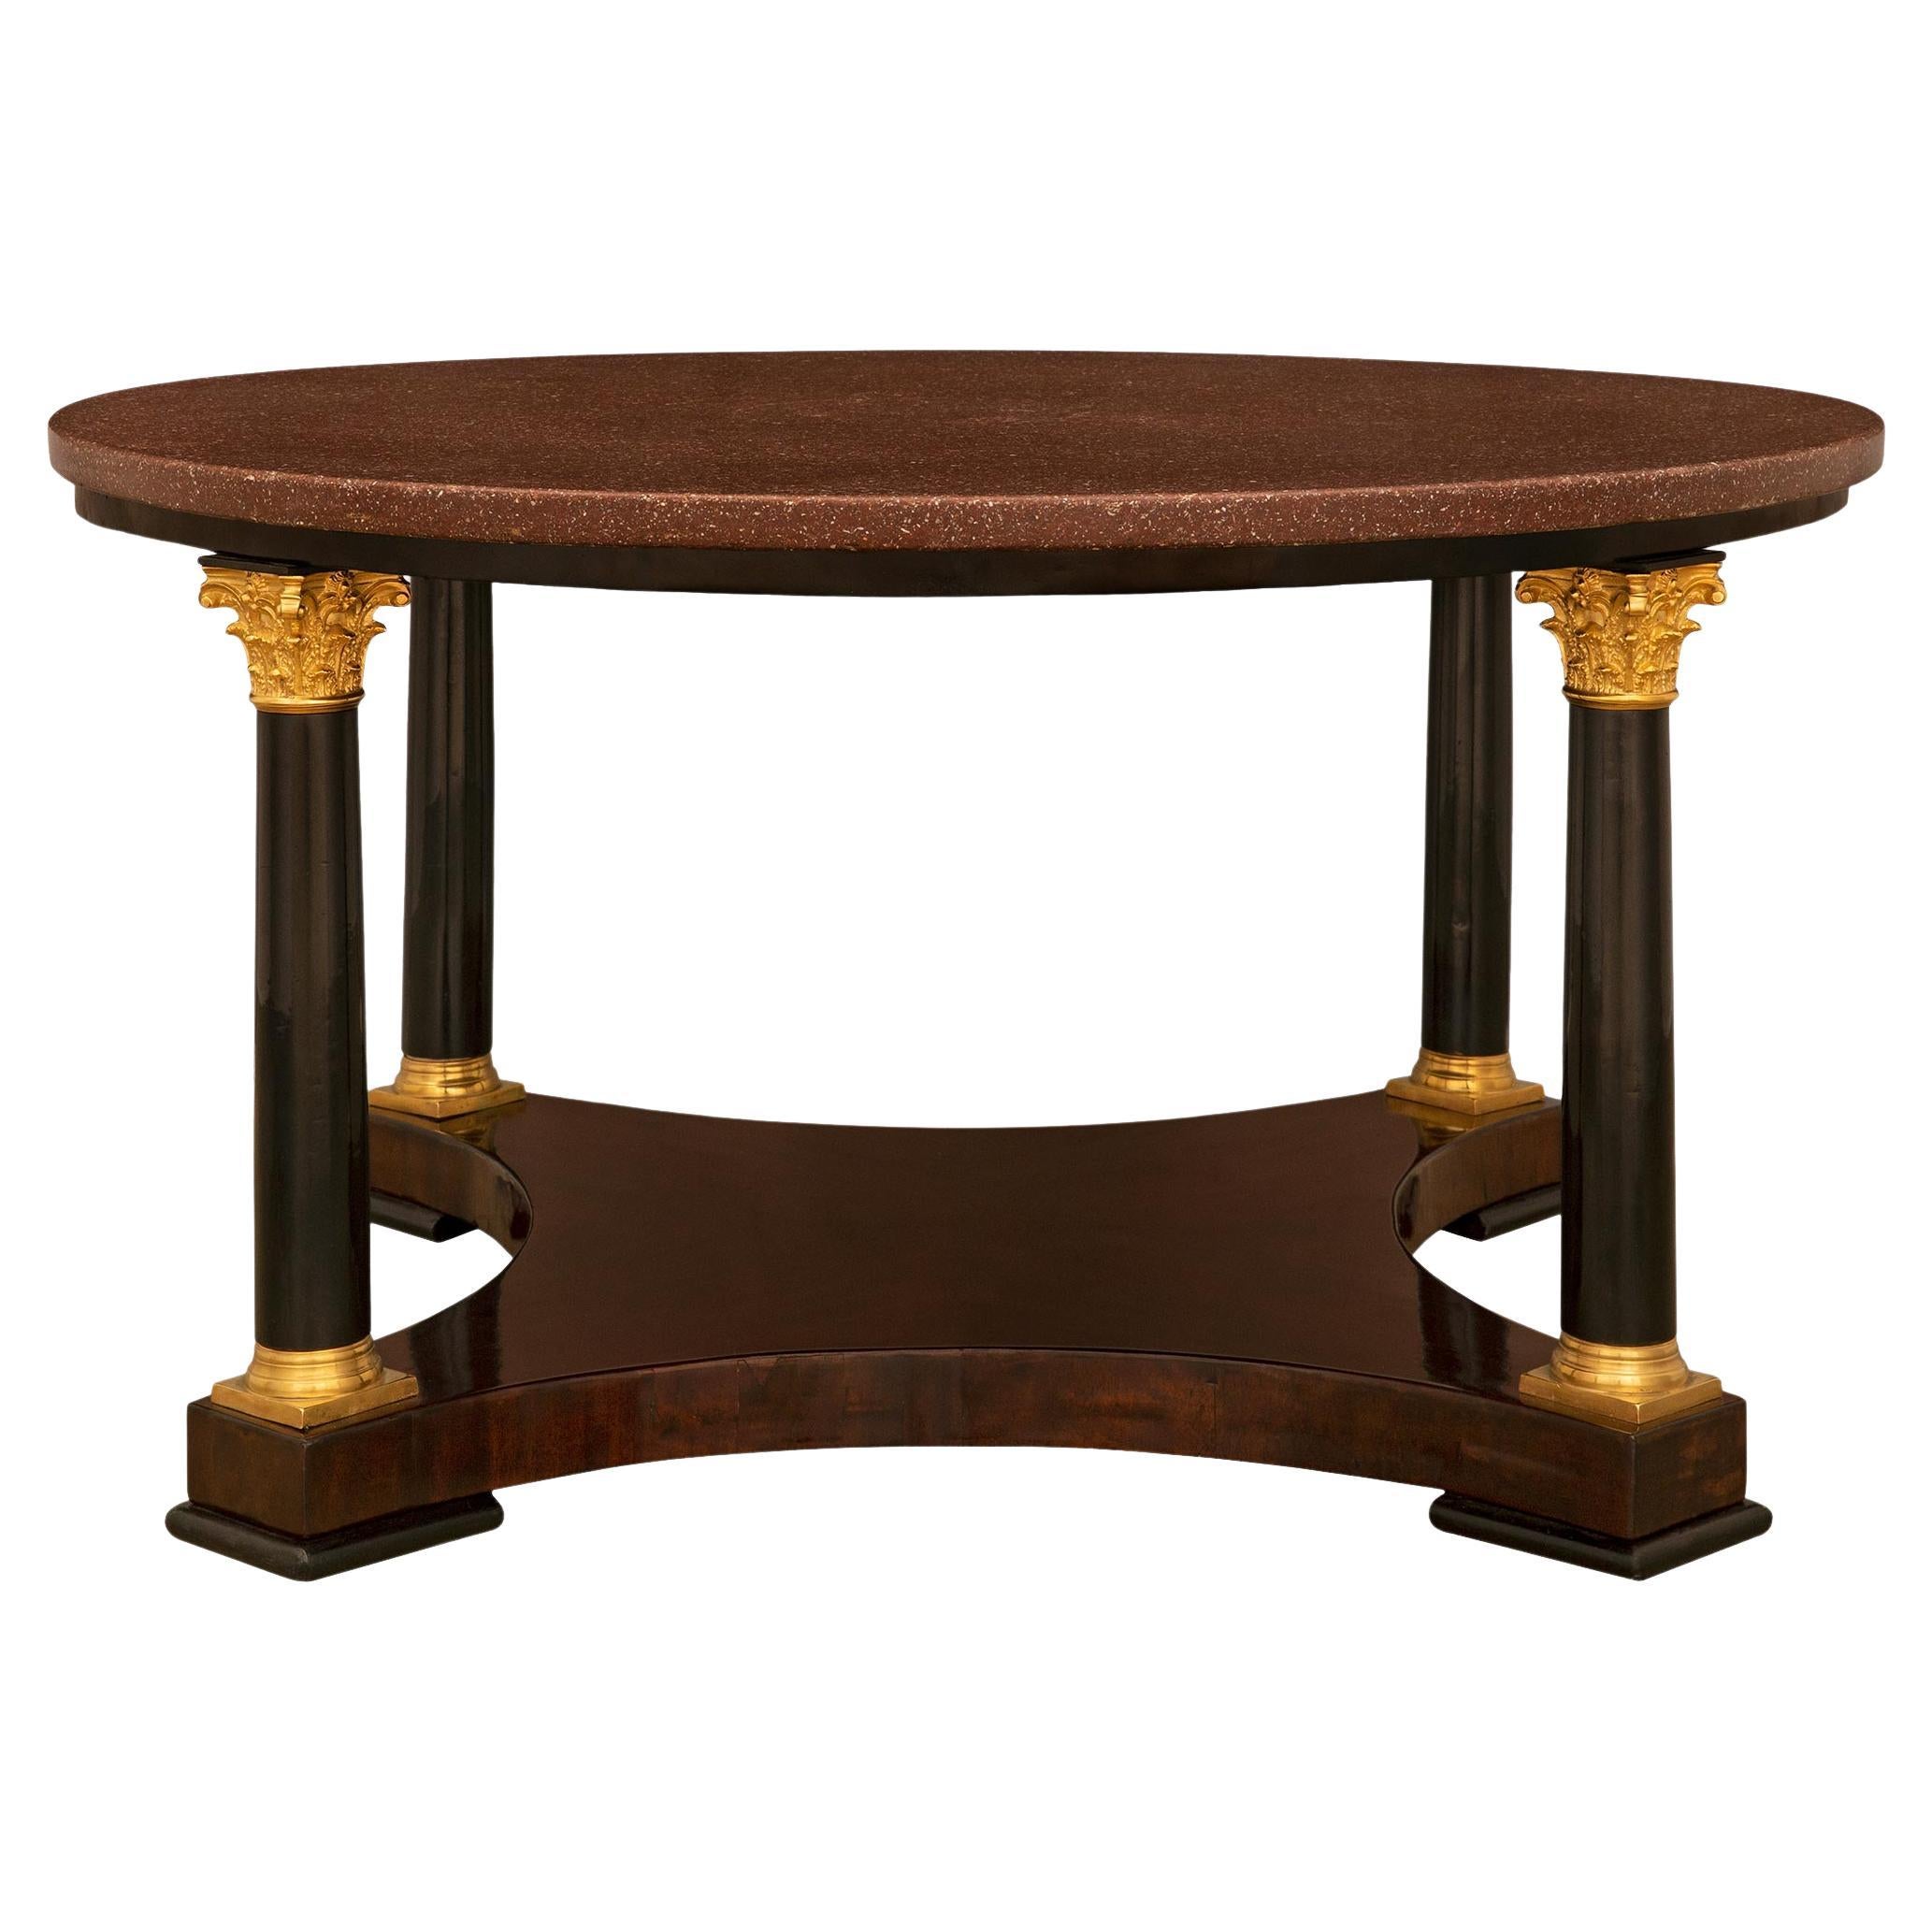 19th Century Neoclassical Style Mahogany, Ormolu and Porphyry Coffee Table For Sale